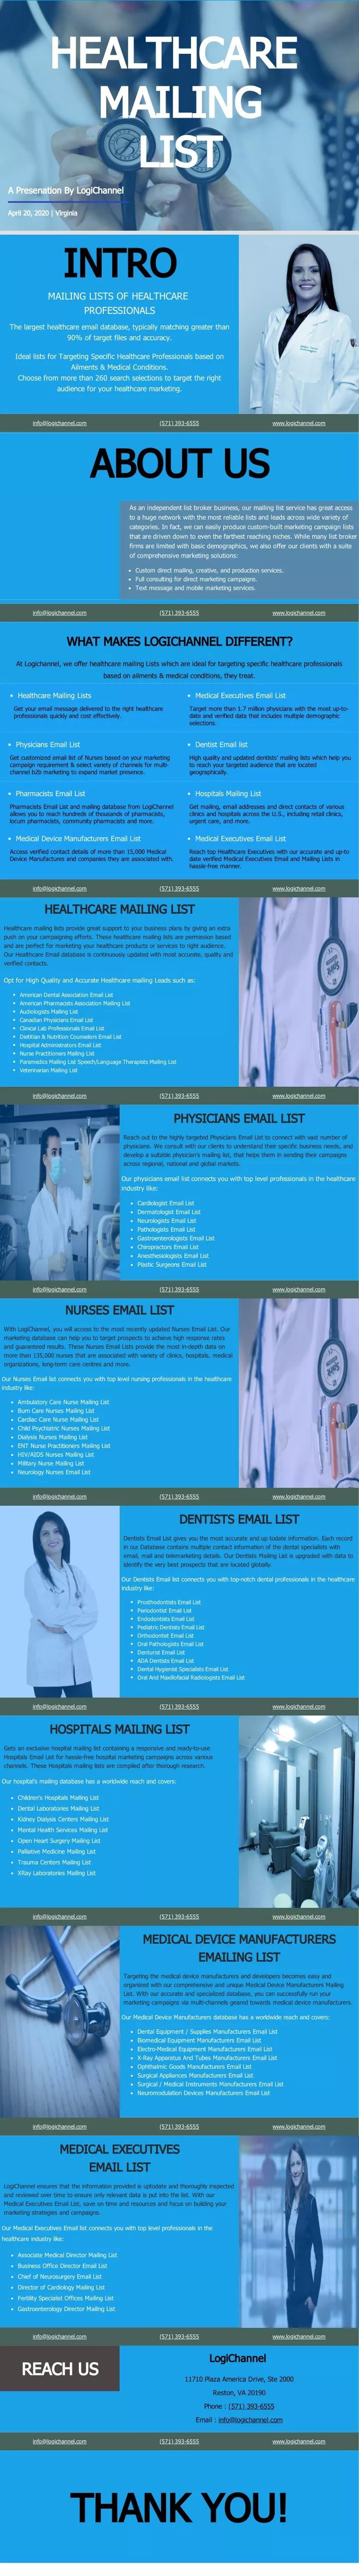 healthcare mailing list